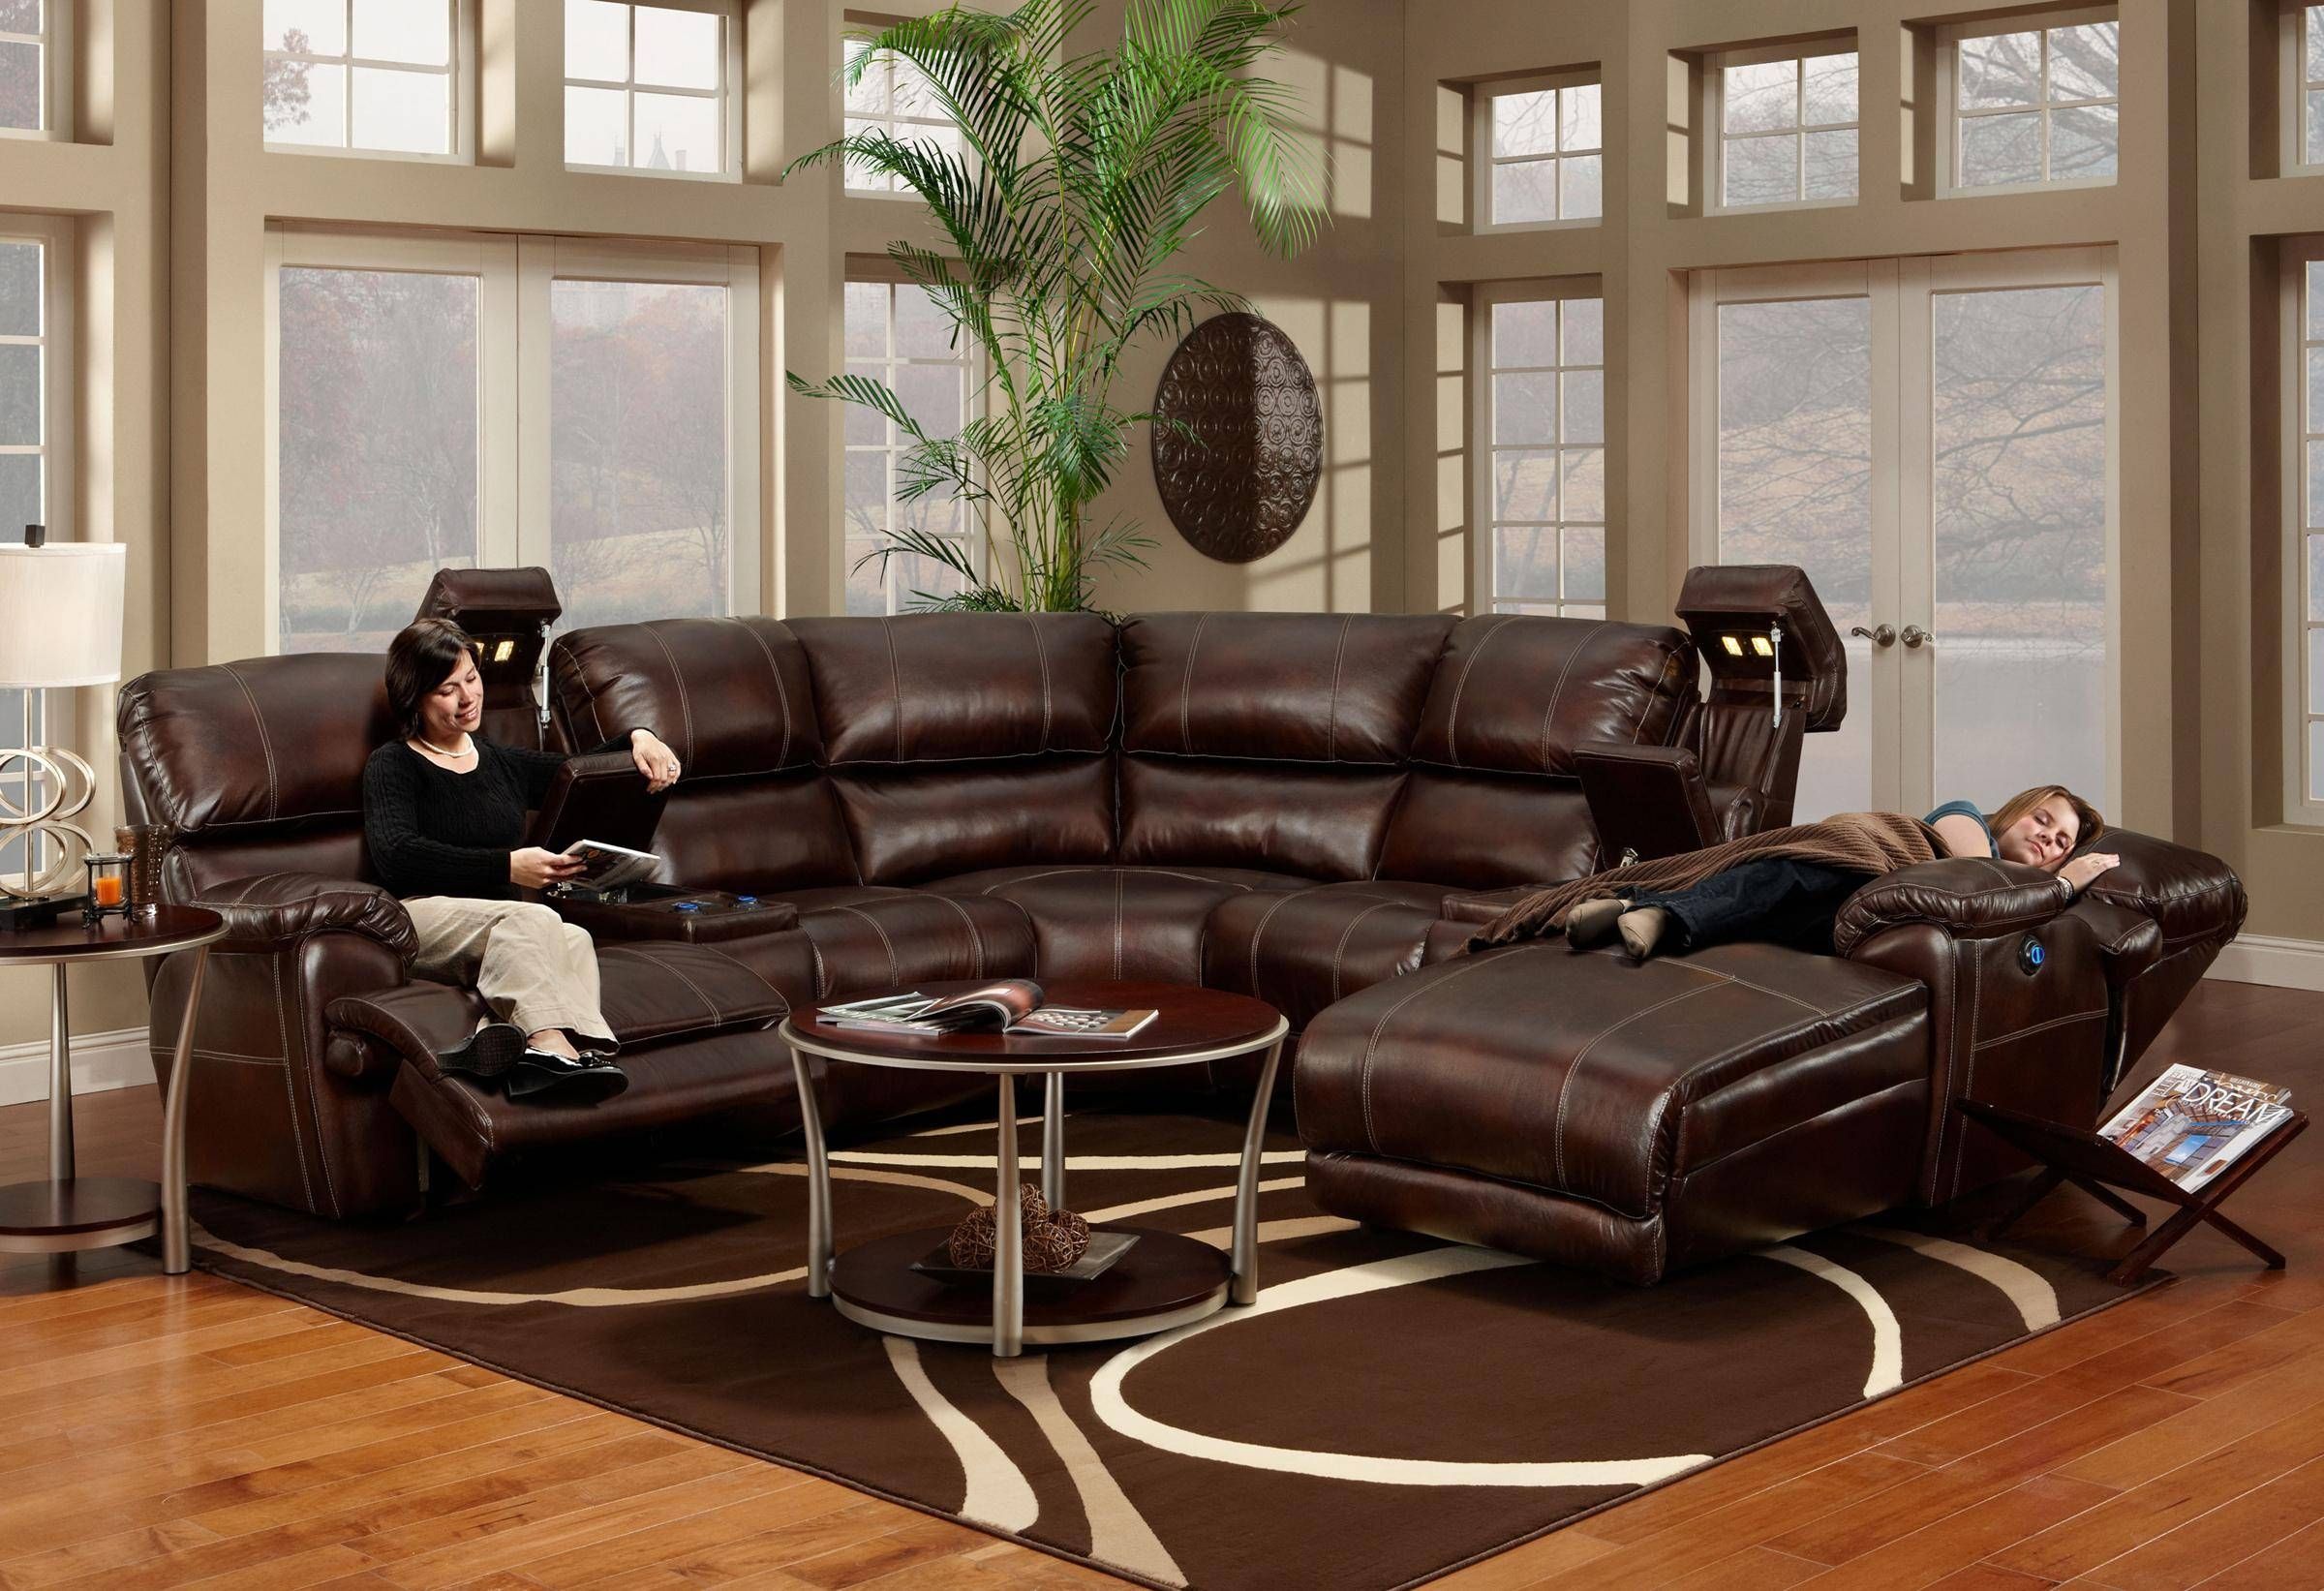 Franklin 572 Reclining Sectional Sofa With Chaise – Ahfa – Sofa Throughout Franklin Sectional Sofas (View 11 of 15)